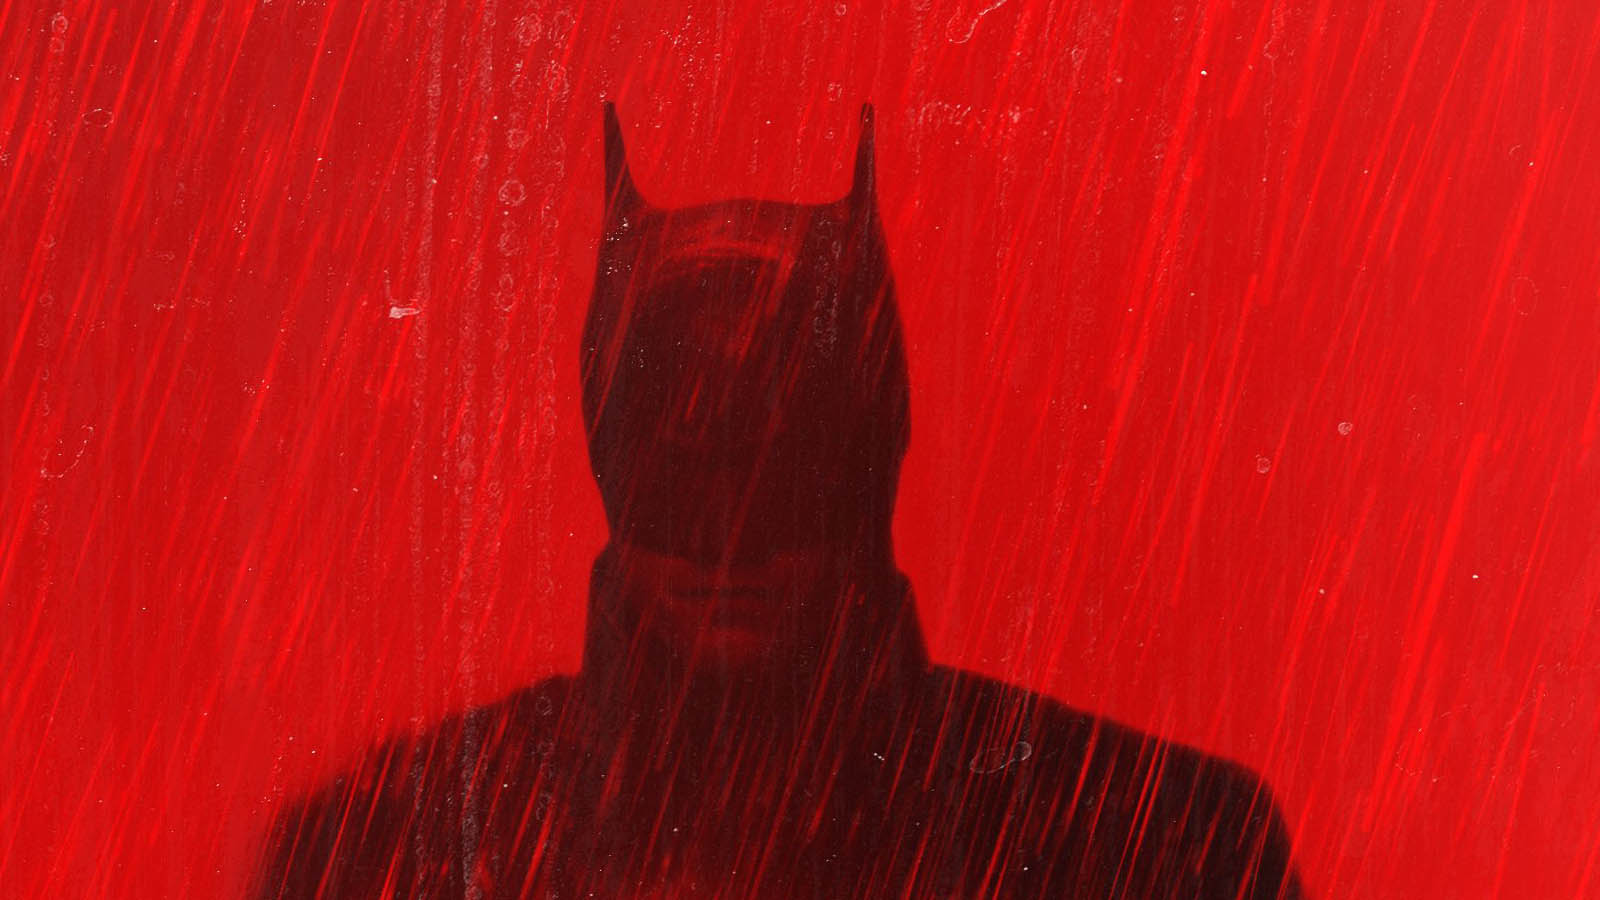 The Batman gets two new teaser posters ahead of DC FanDome